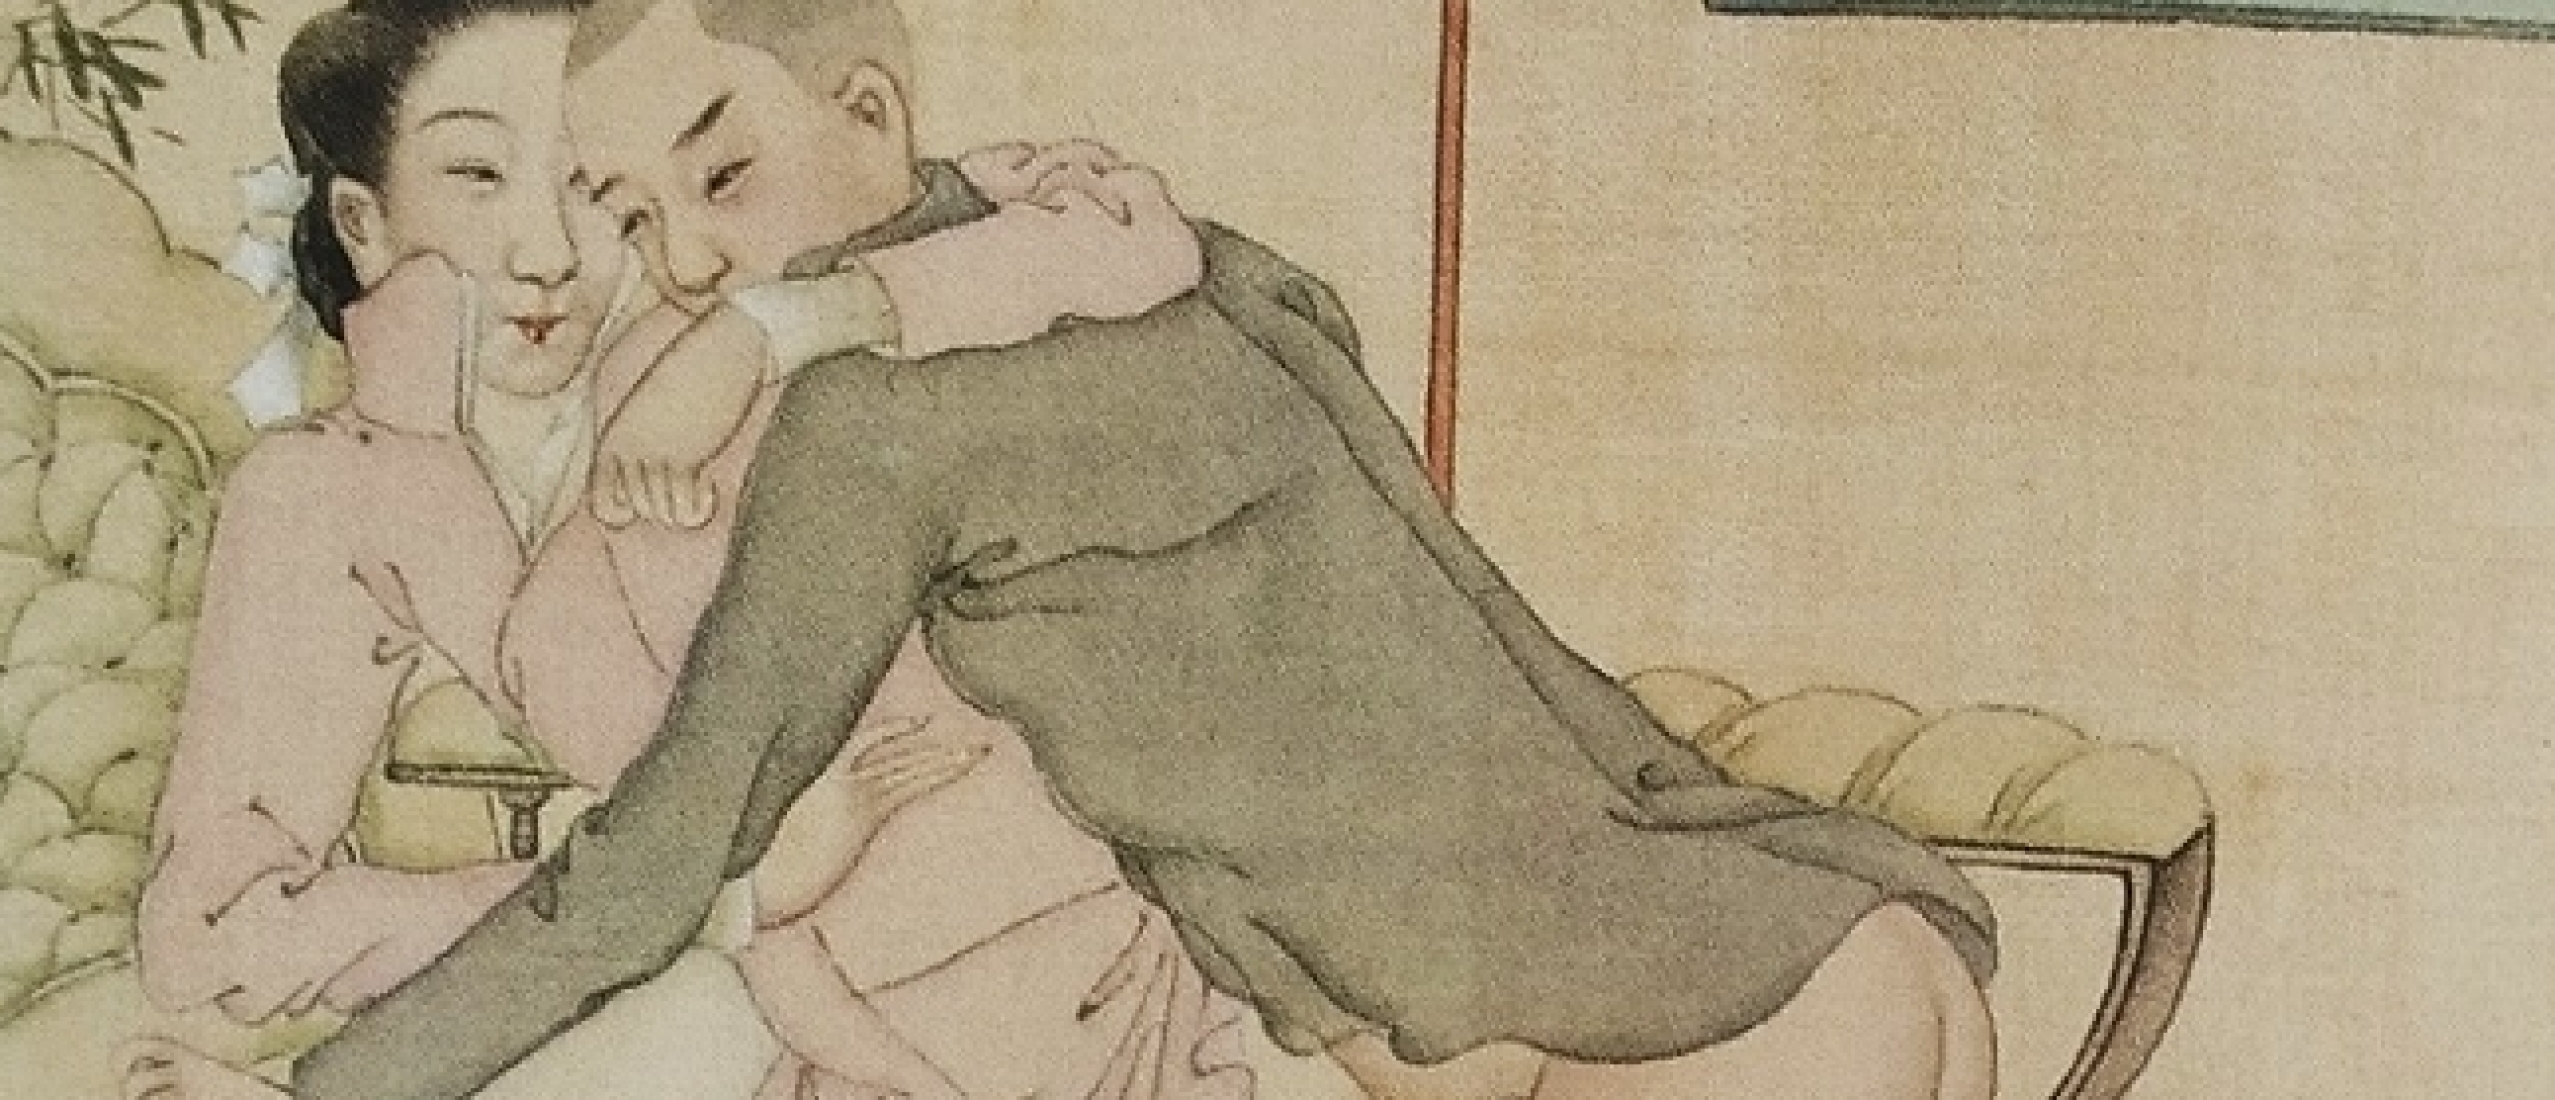 Young Intimate Lovers In the Fashion of 1920s Shanghai